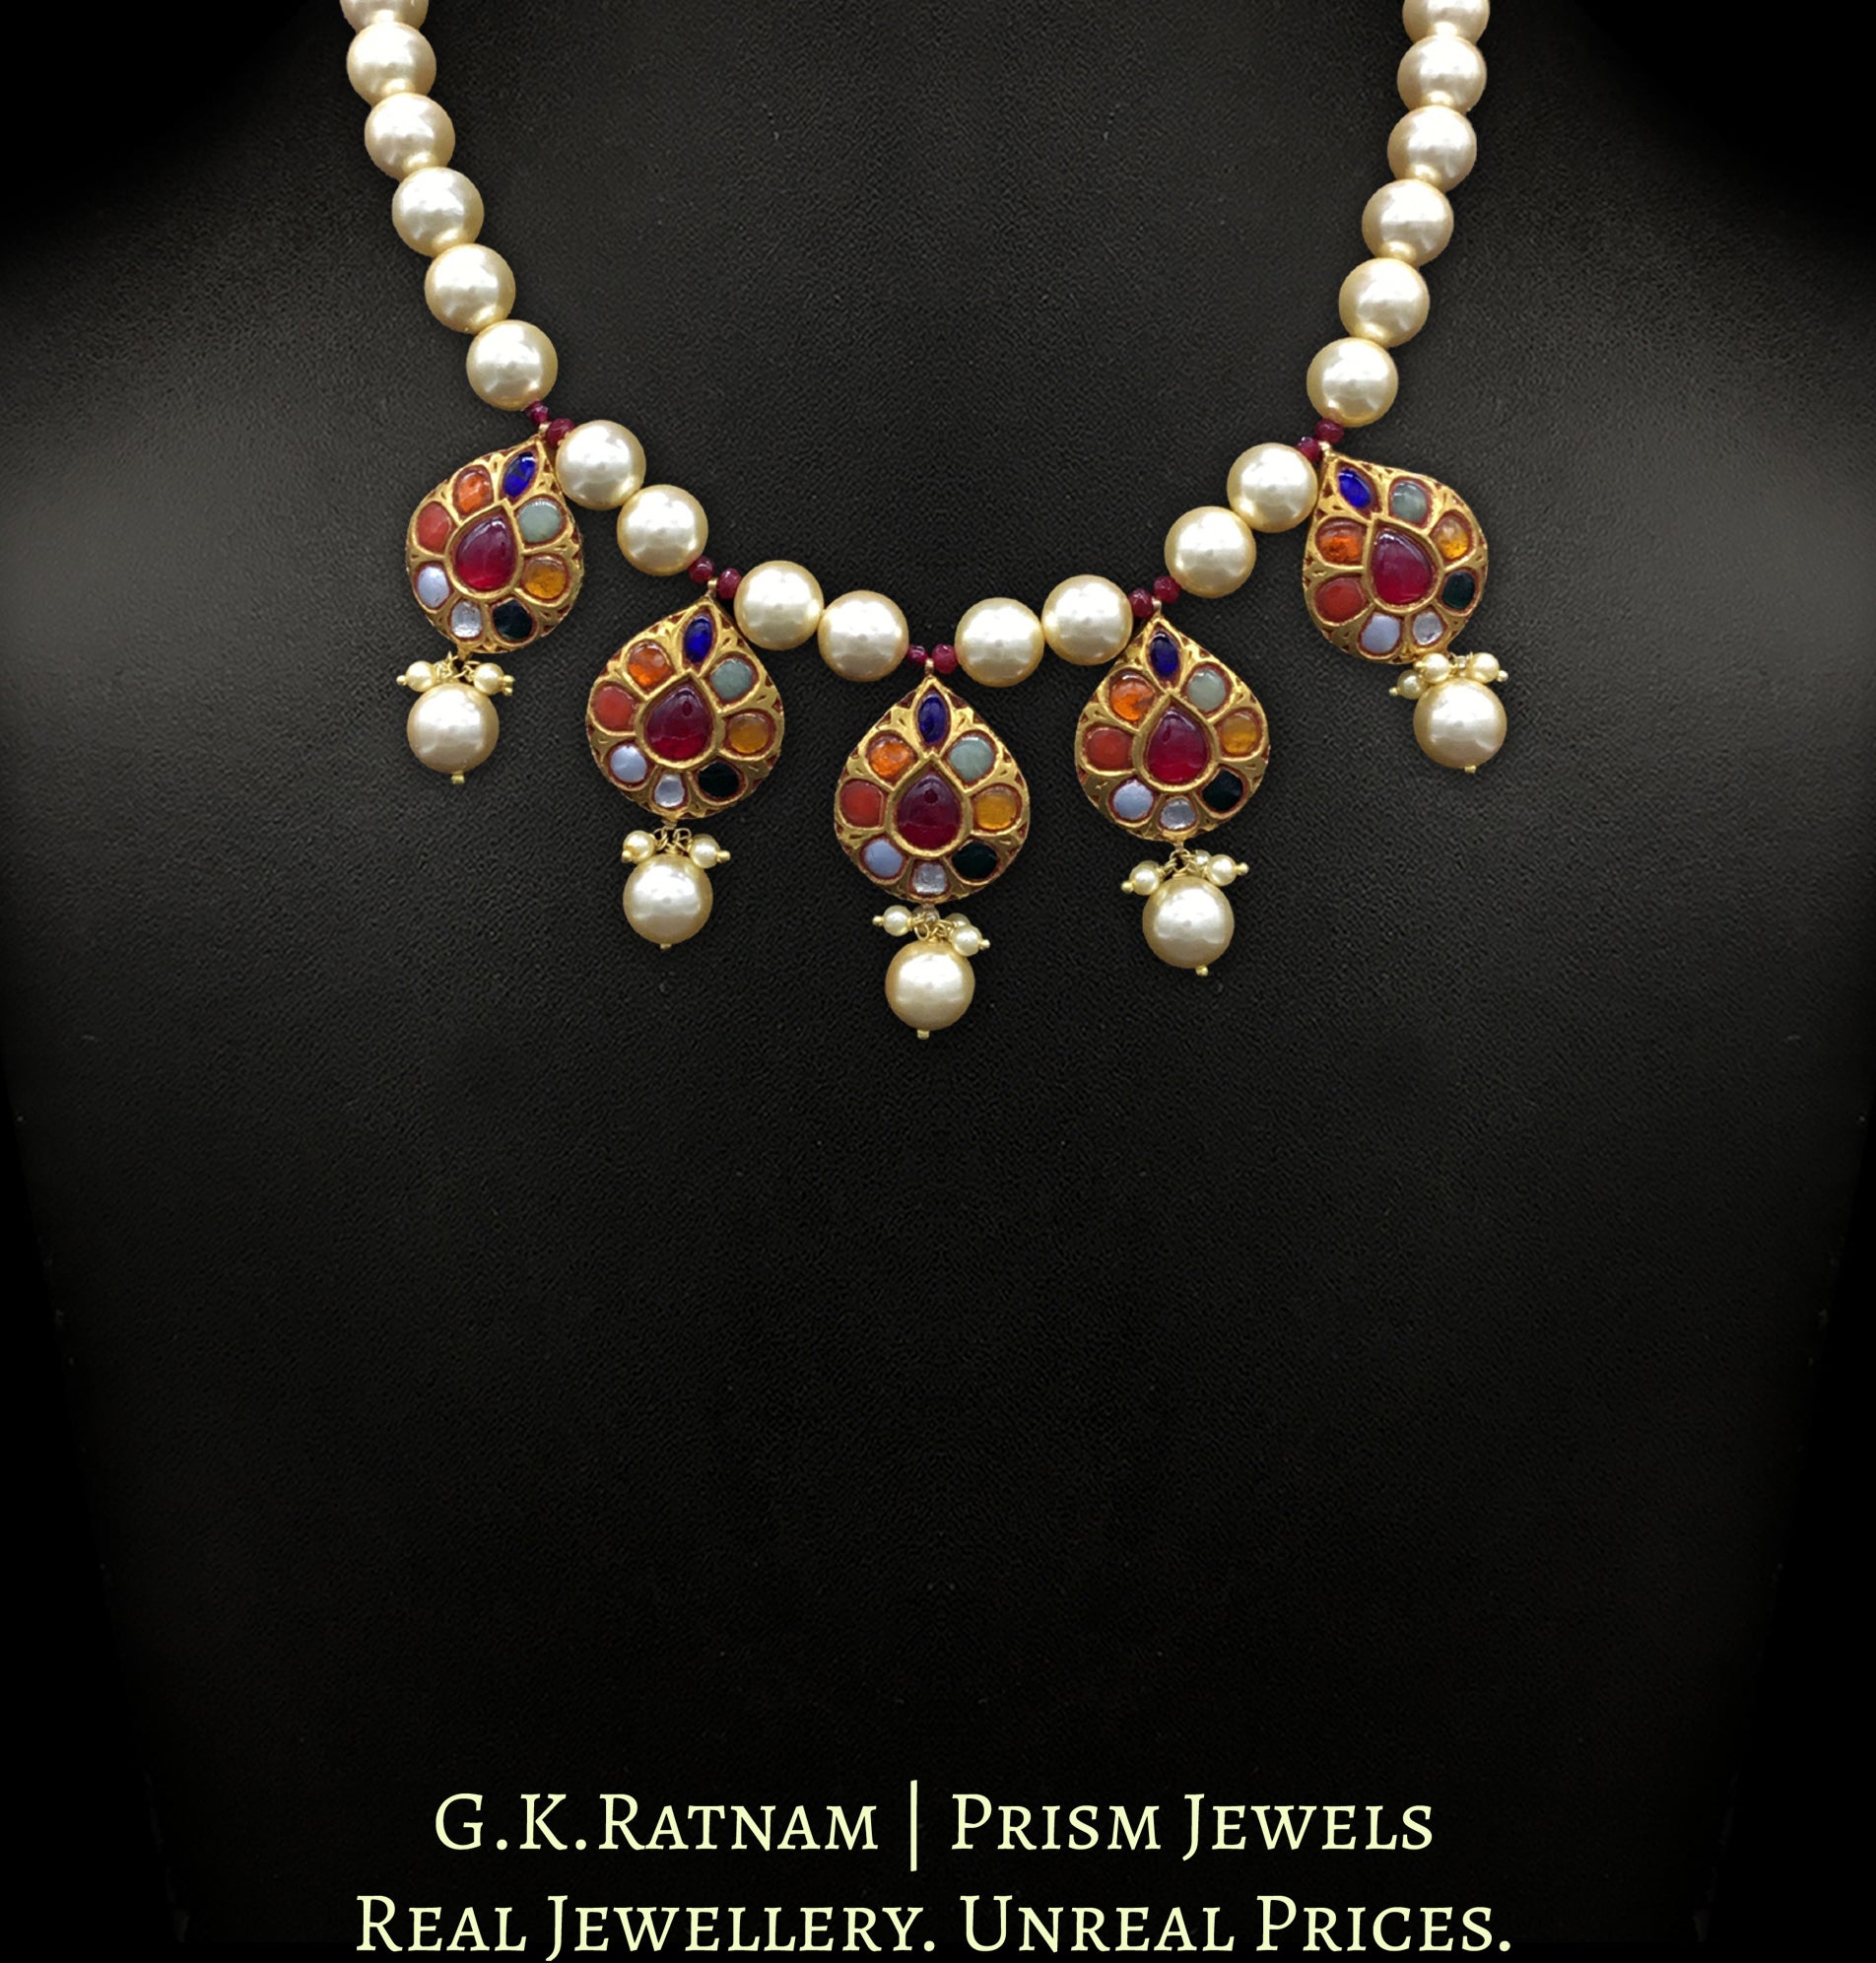 23k Gold and Diamond Polki Navratna Necklace with five pear-shaped tikdas strung in shell pearls - G. K. Ratnam